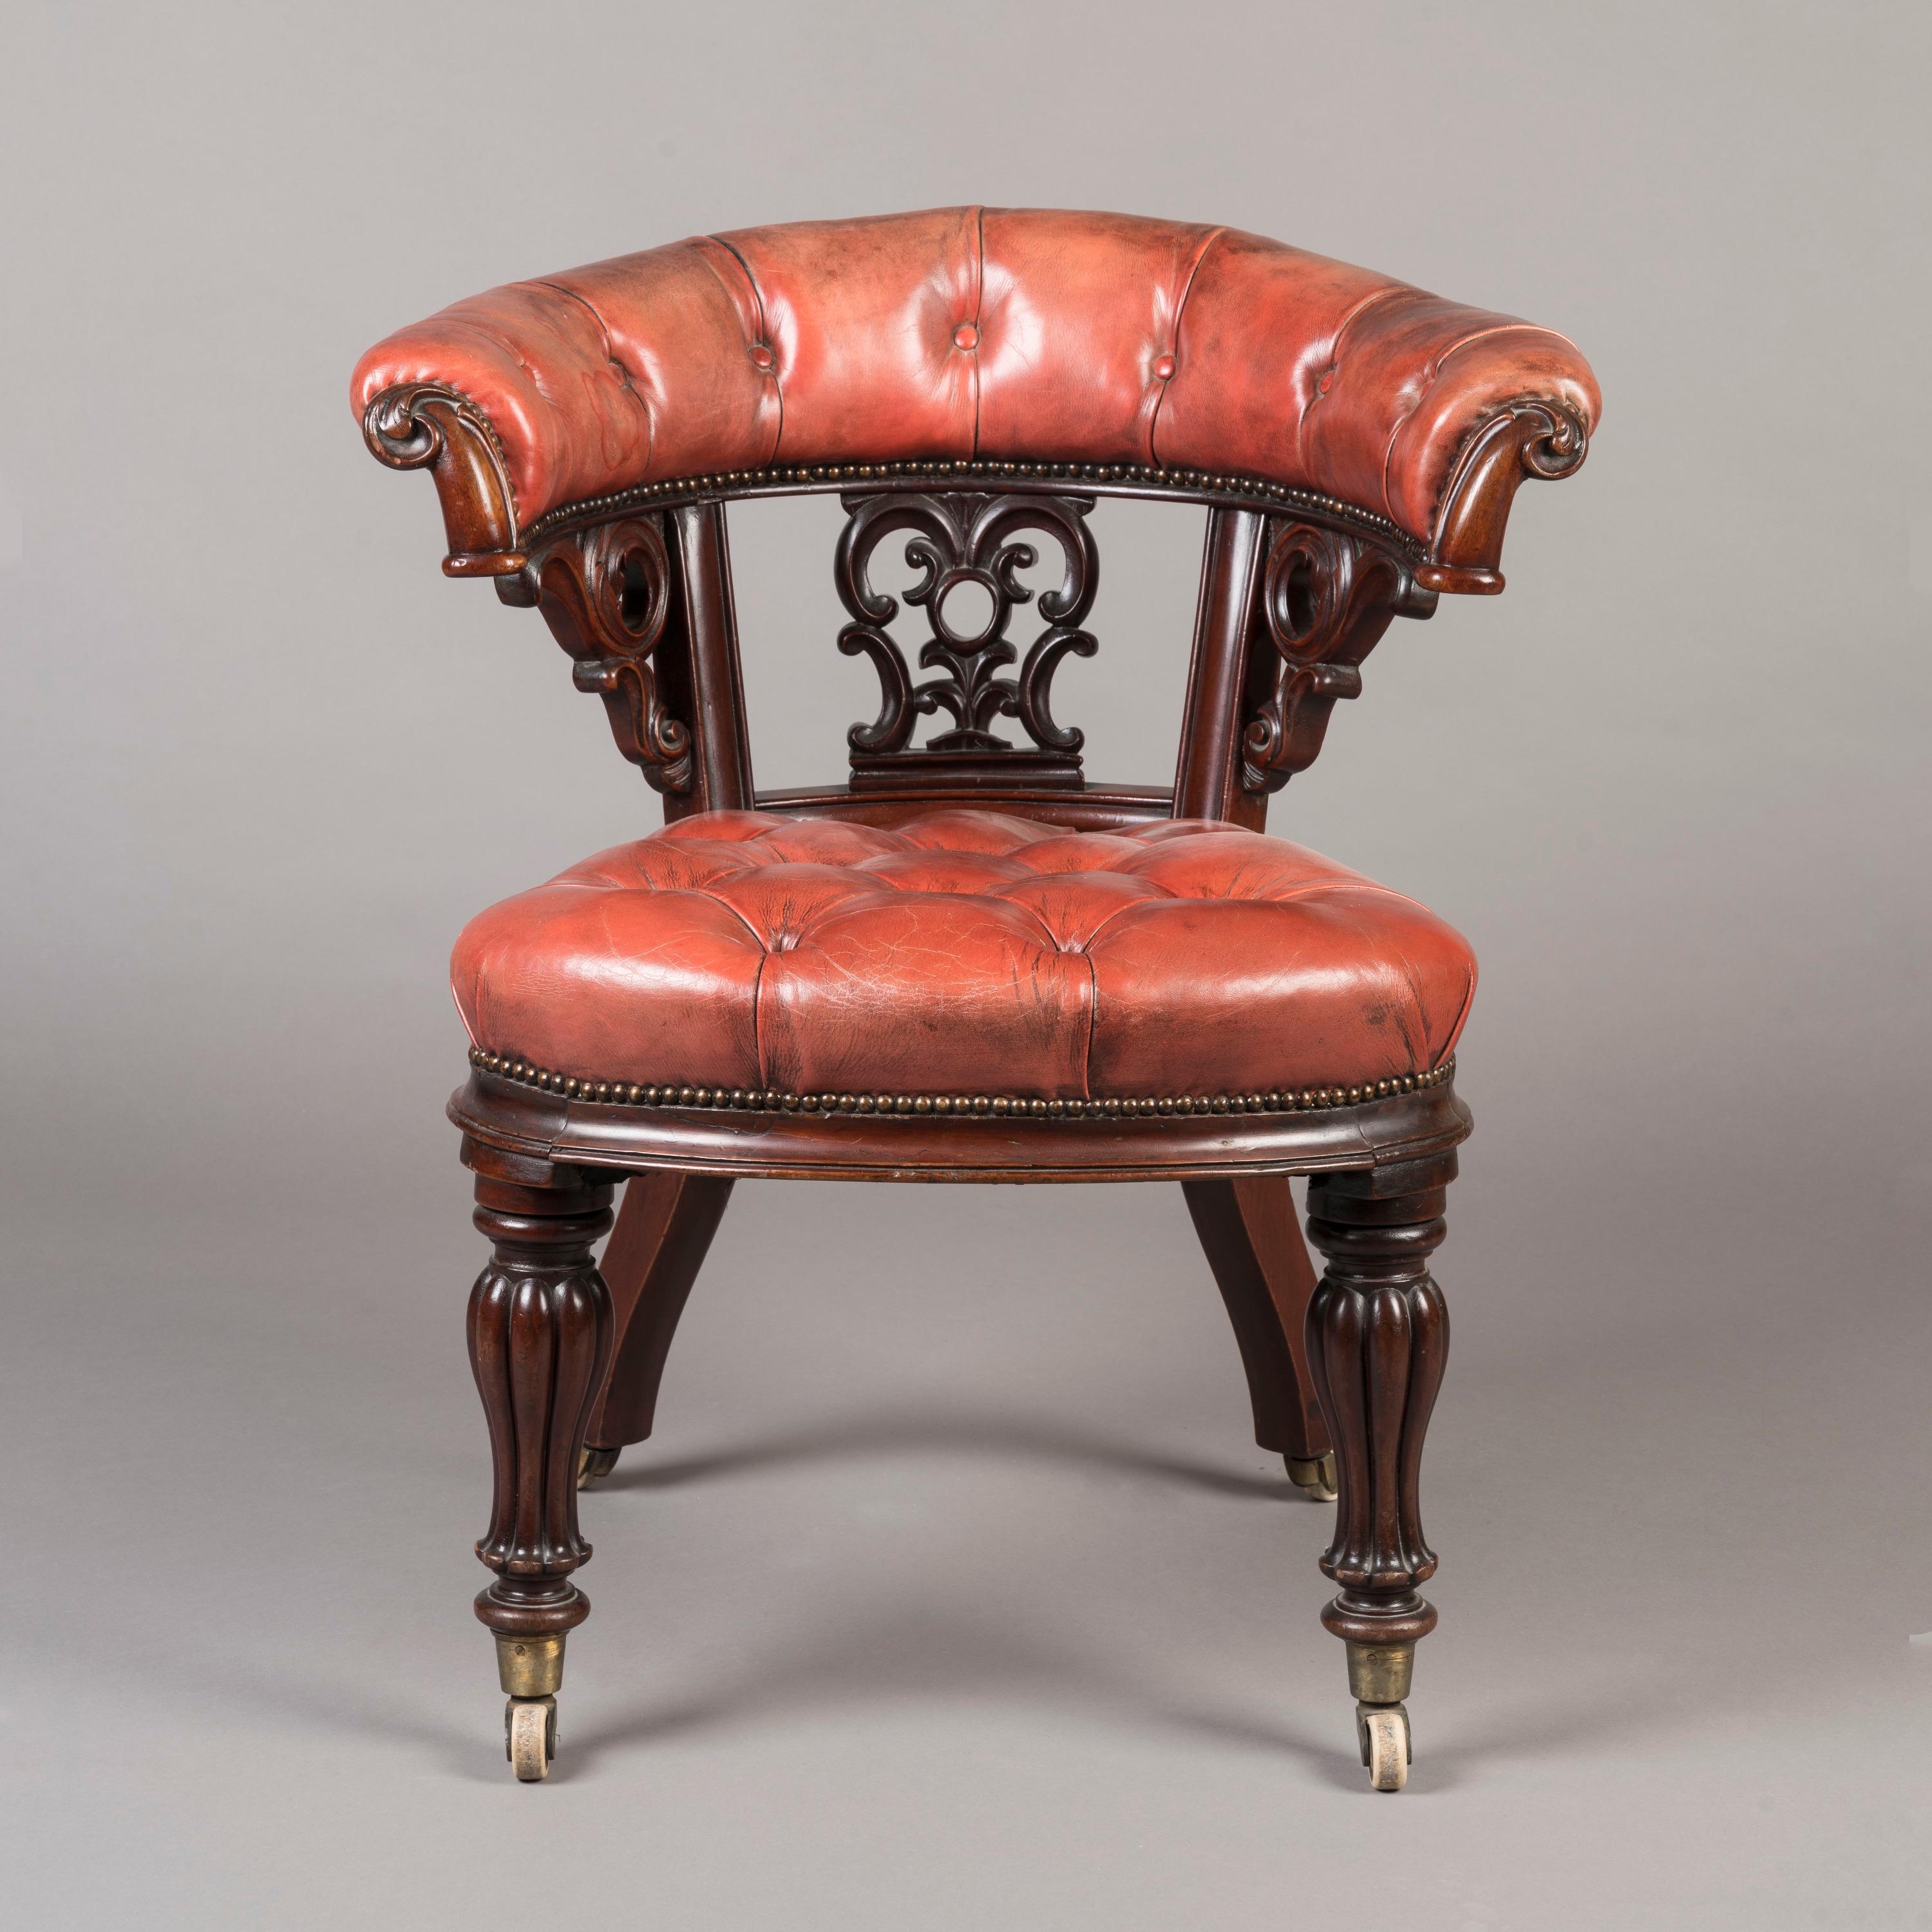 A Mid-19th Century Carved Mahogany Desk Chair

Constructed from solid carved mahogany, the chair standing on confidently lobed baluster front legs, with splayed legs to the rear, all with porcelain castors; the horseshoe-shaped back with pierced